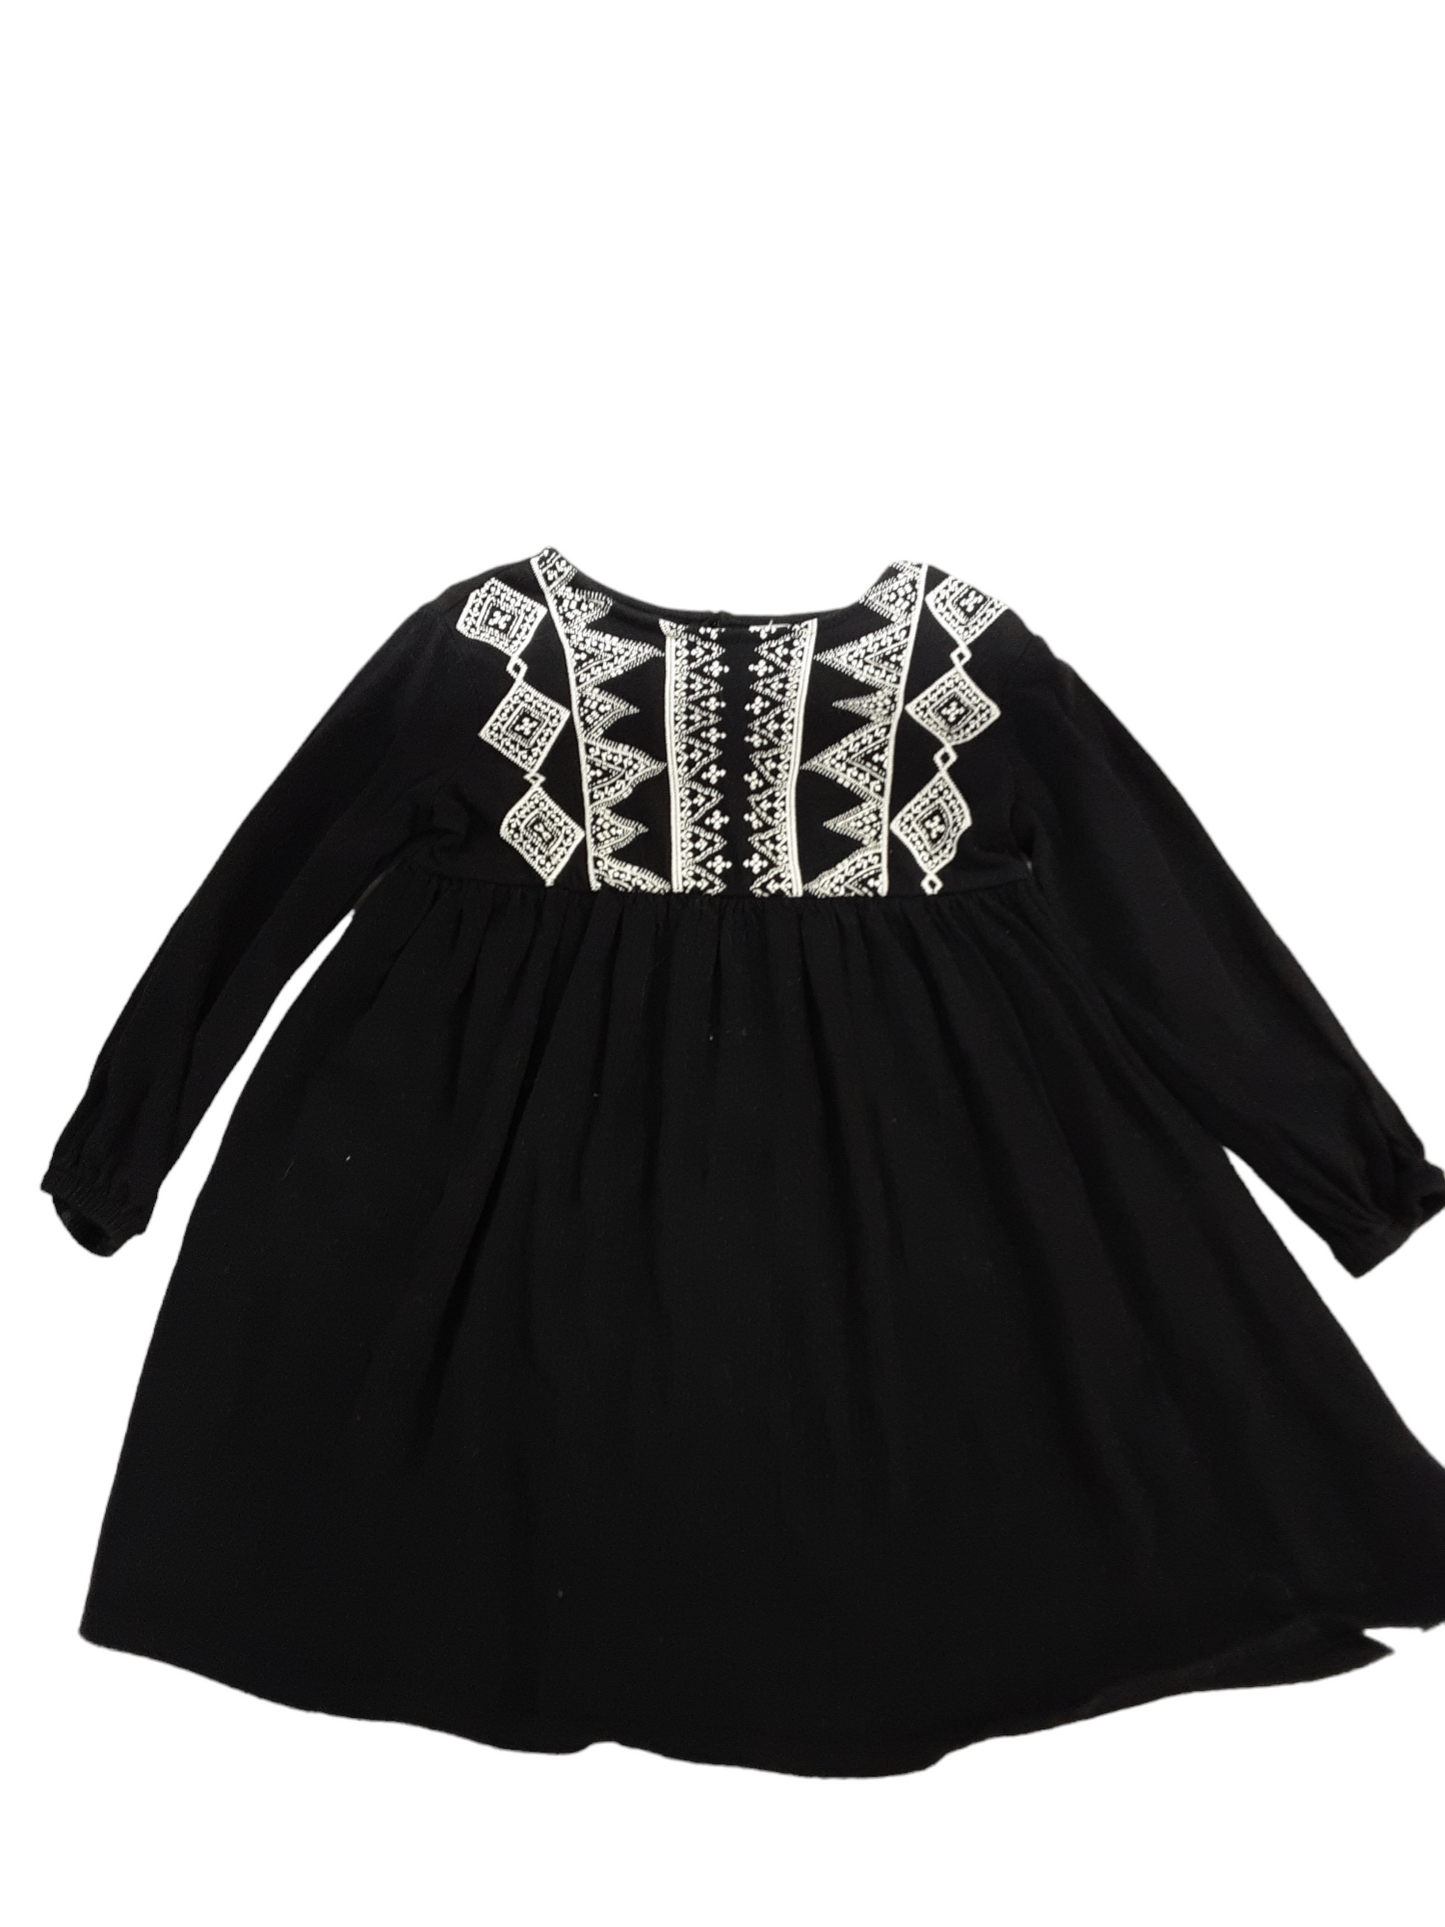 Black with white smock style dress size 4